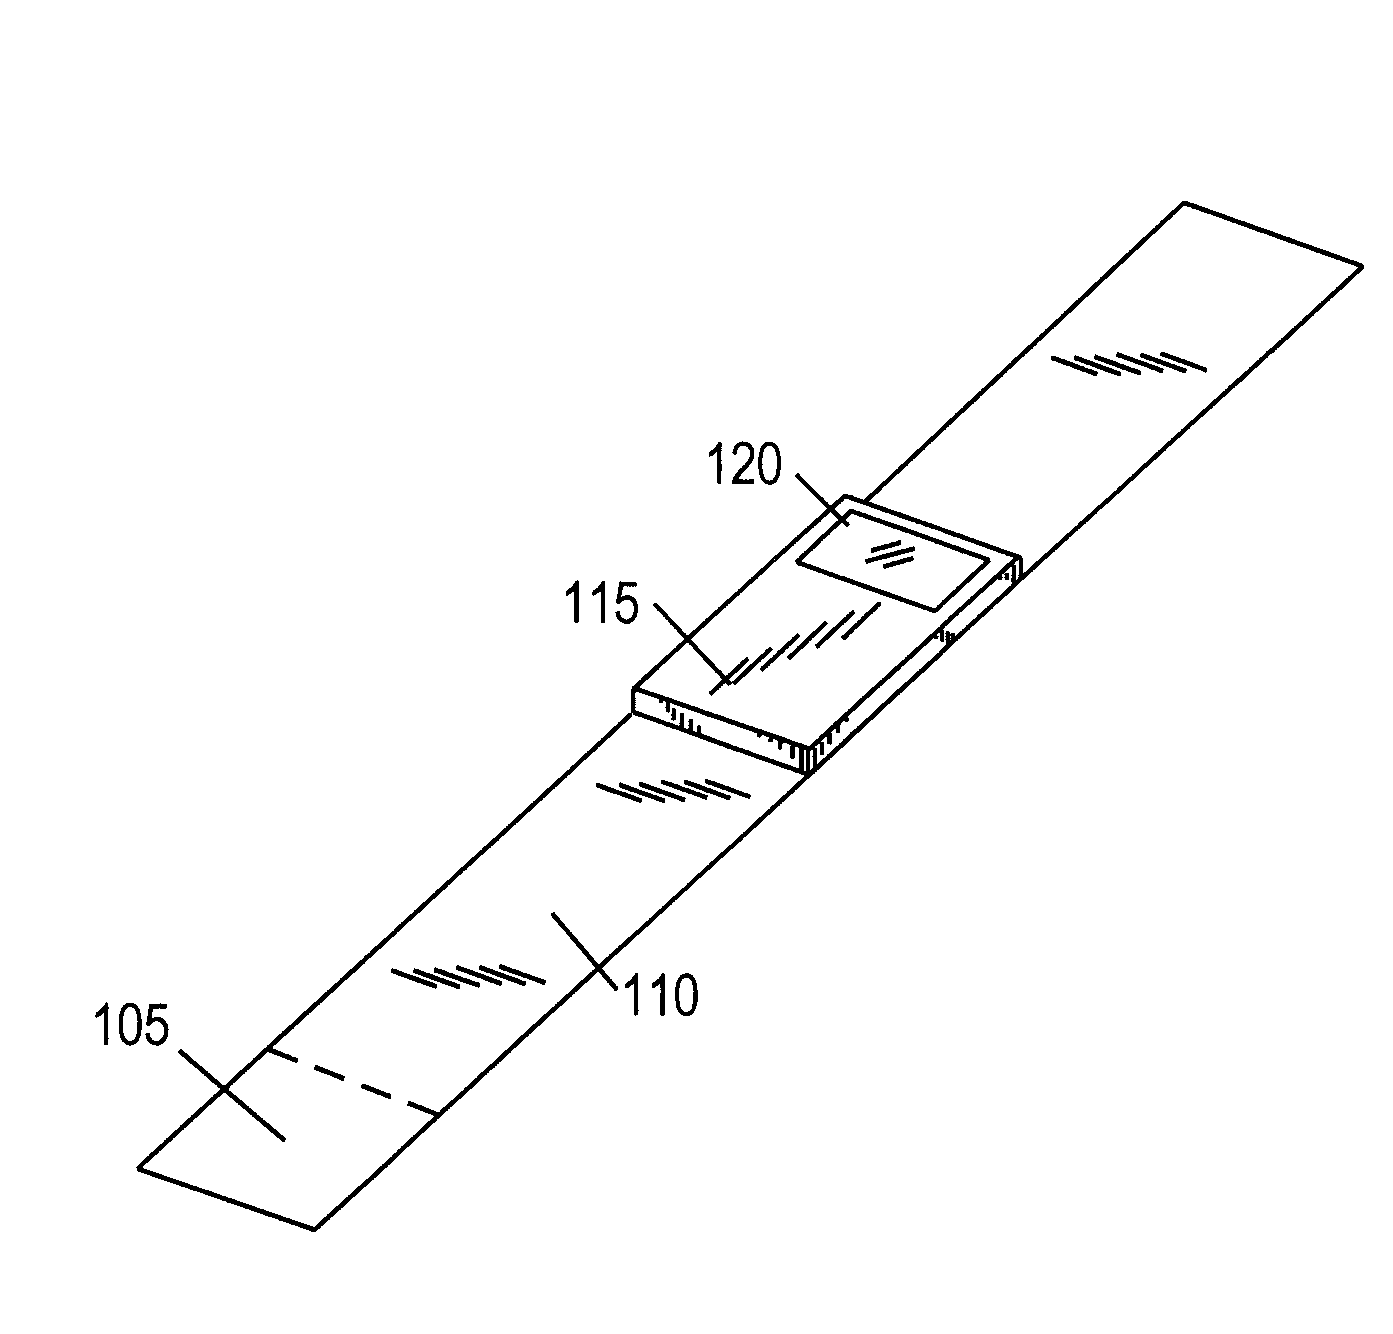 System and method for activating a device based on a record of physical activity